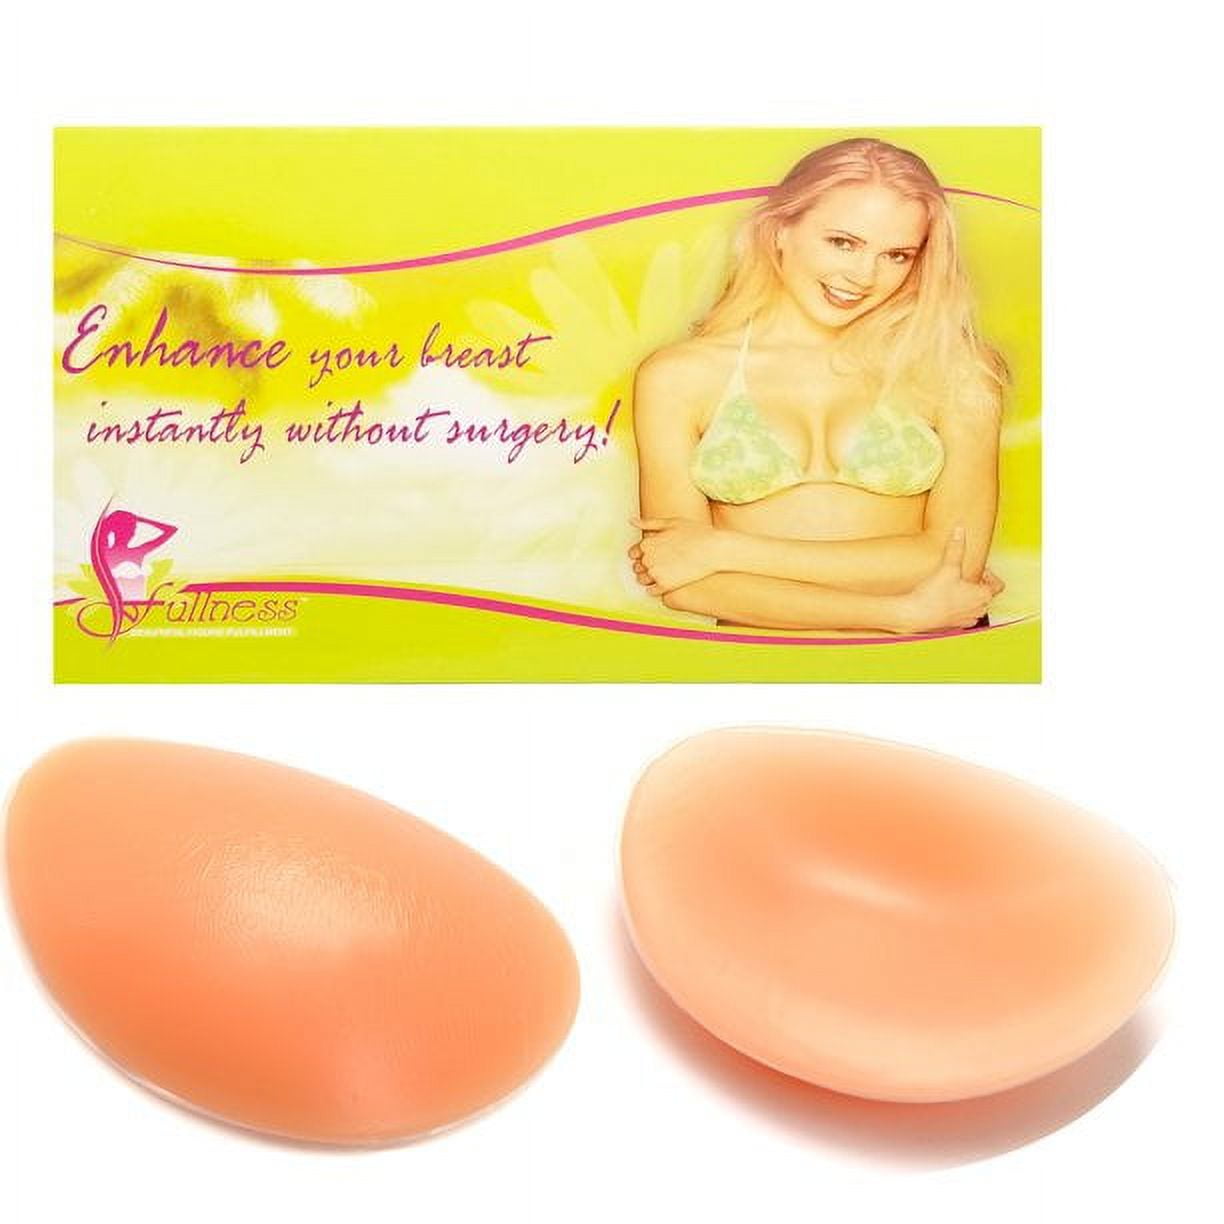 NEW WOMEN'S FULLNESS MAX SILICONE PUSH UP BRA CLEAVAGE ENHANCER PADS STYLE  #2011